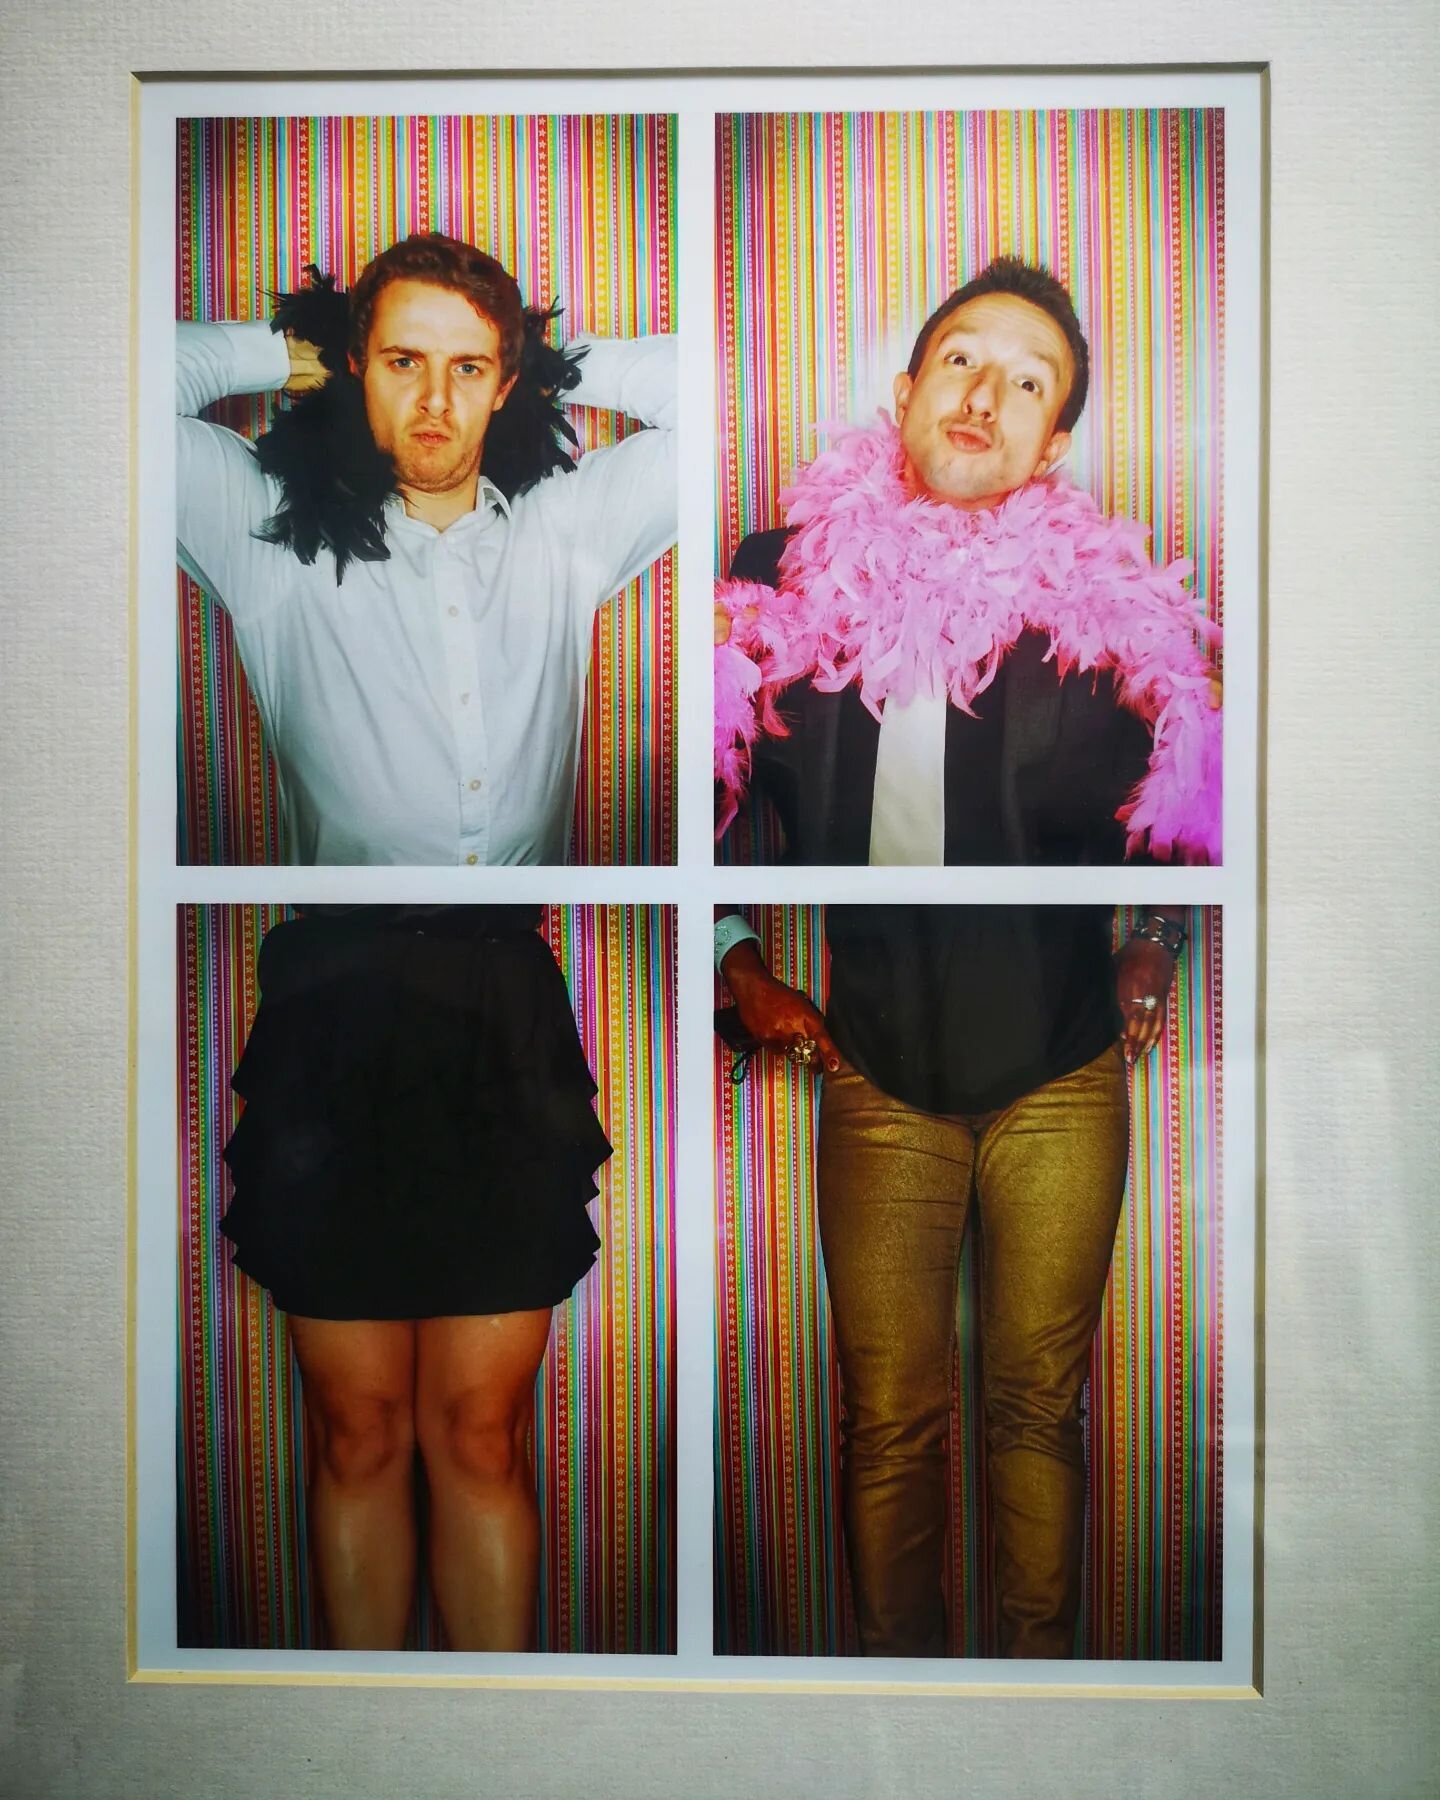 One of the funny poses we attempt with our guests in our amazing Photo Booths. This one is so good we had it framed 🤣

#shufflesevents #iwweddings #photoboothhire #iwphotobooth #bestweddingever #isleofwight #backdrop&nbsp; #photoboothfun&nbsp; #prop